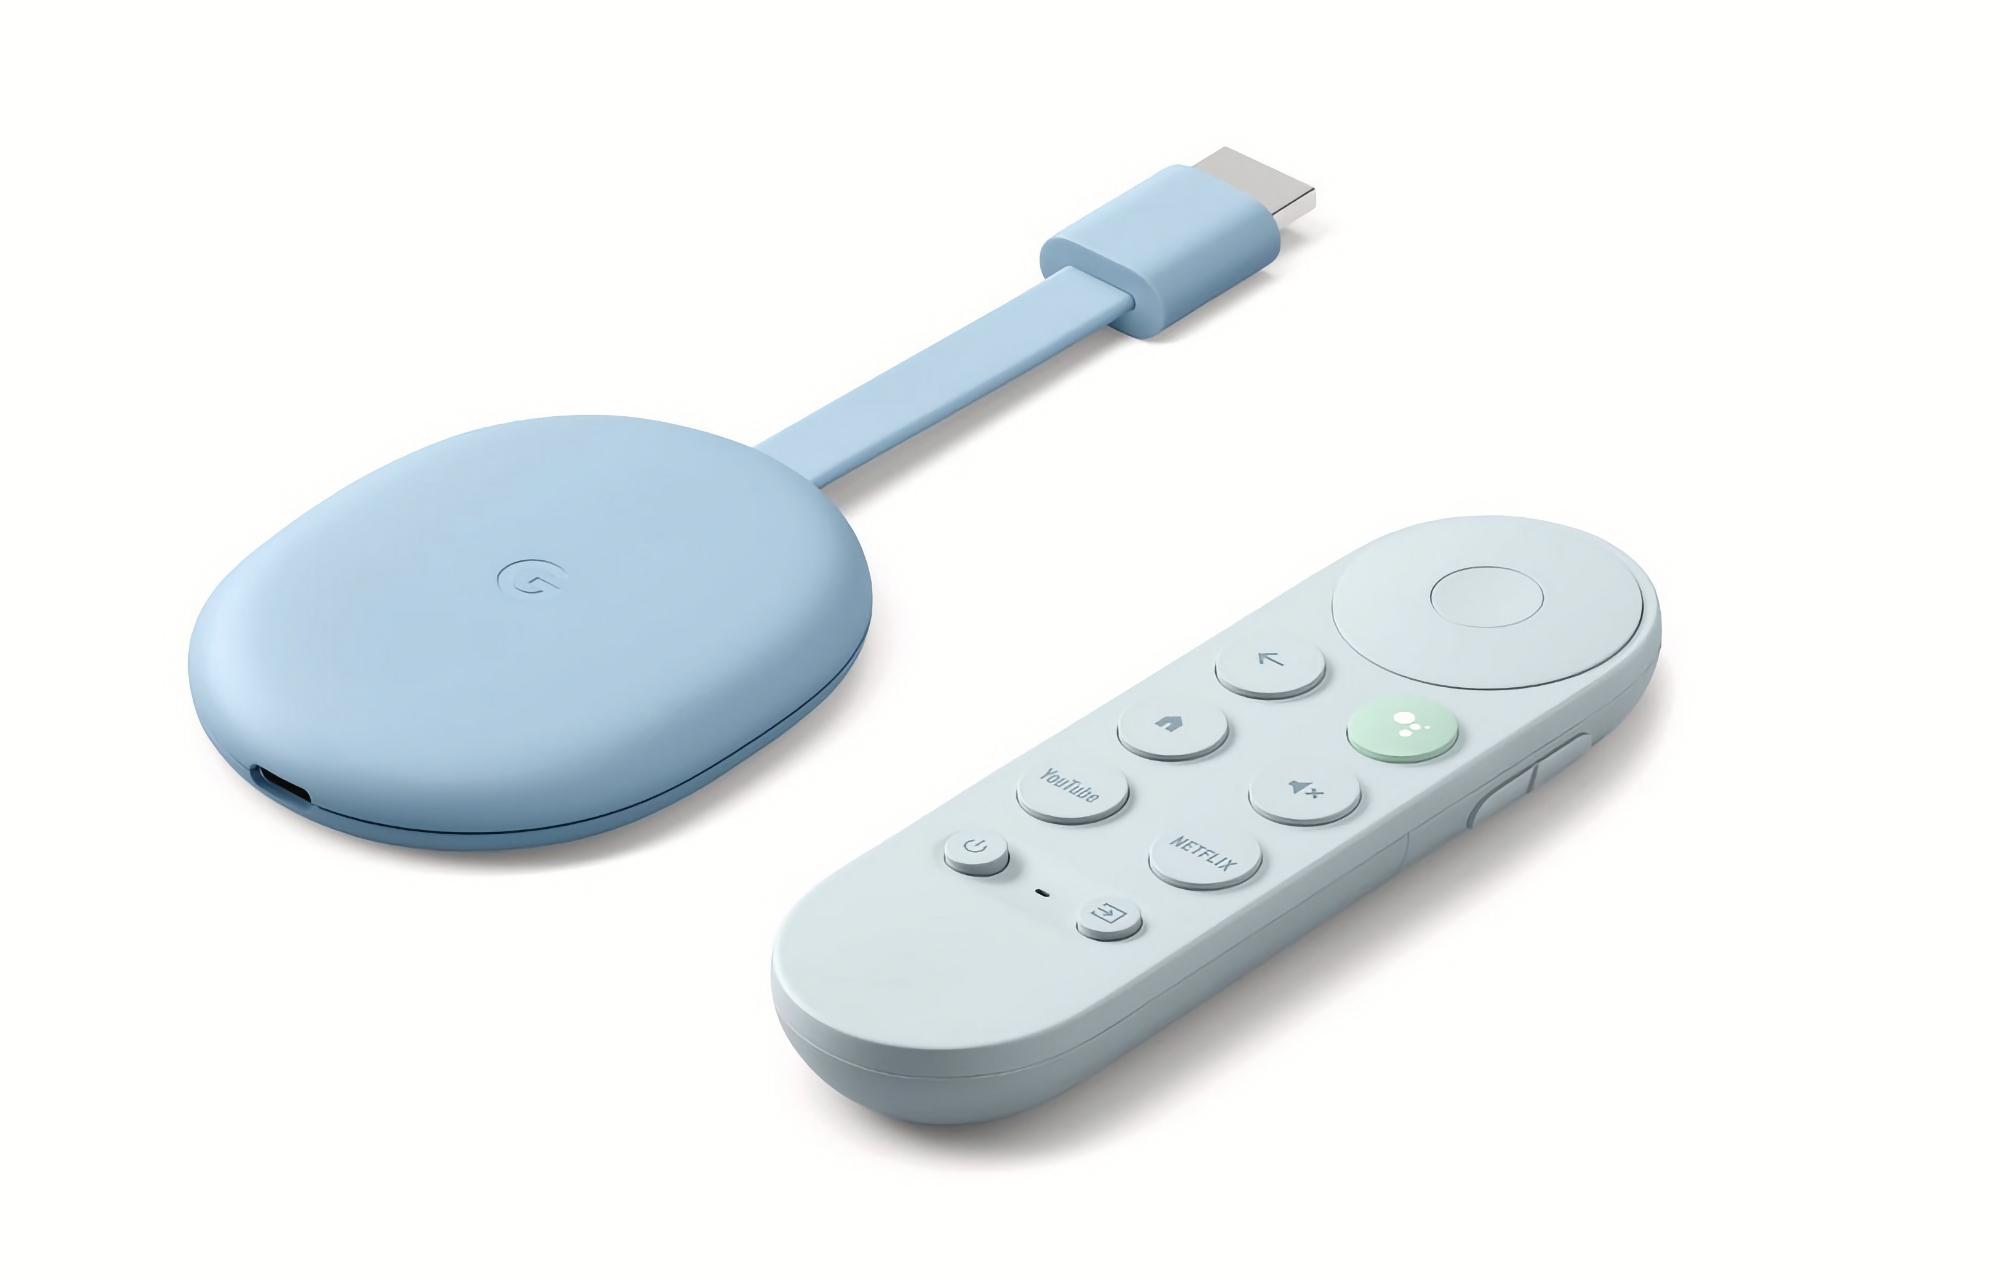 Google is working on a new Chromecast with Google TV on board